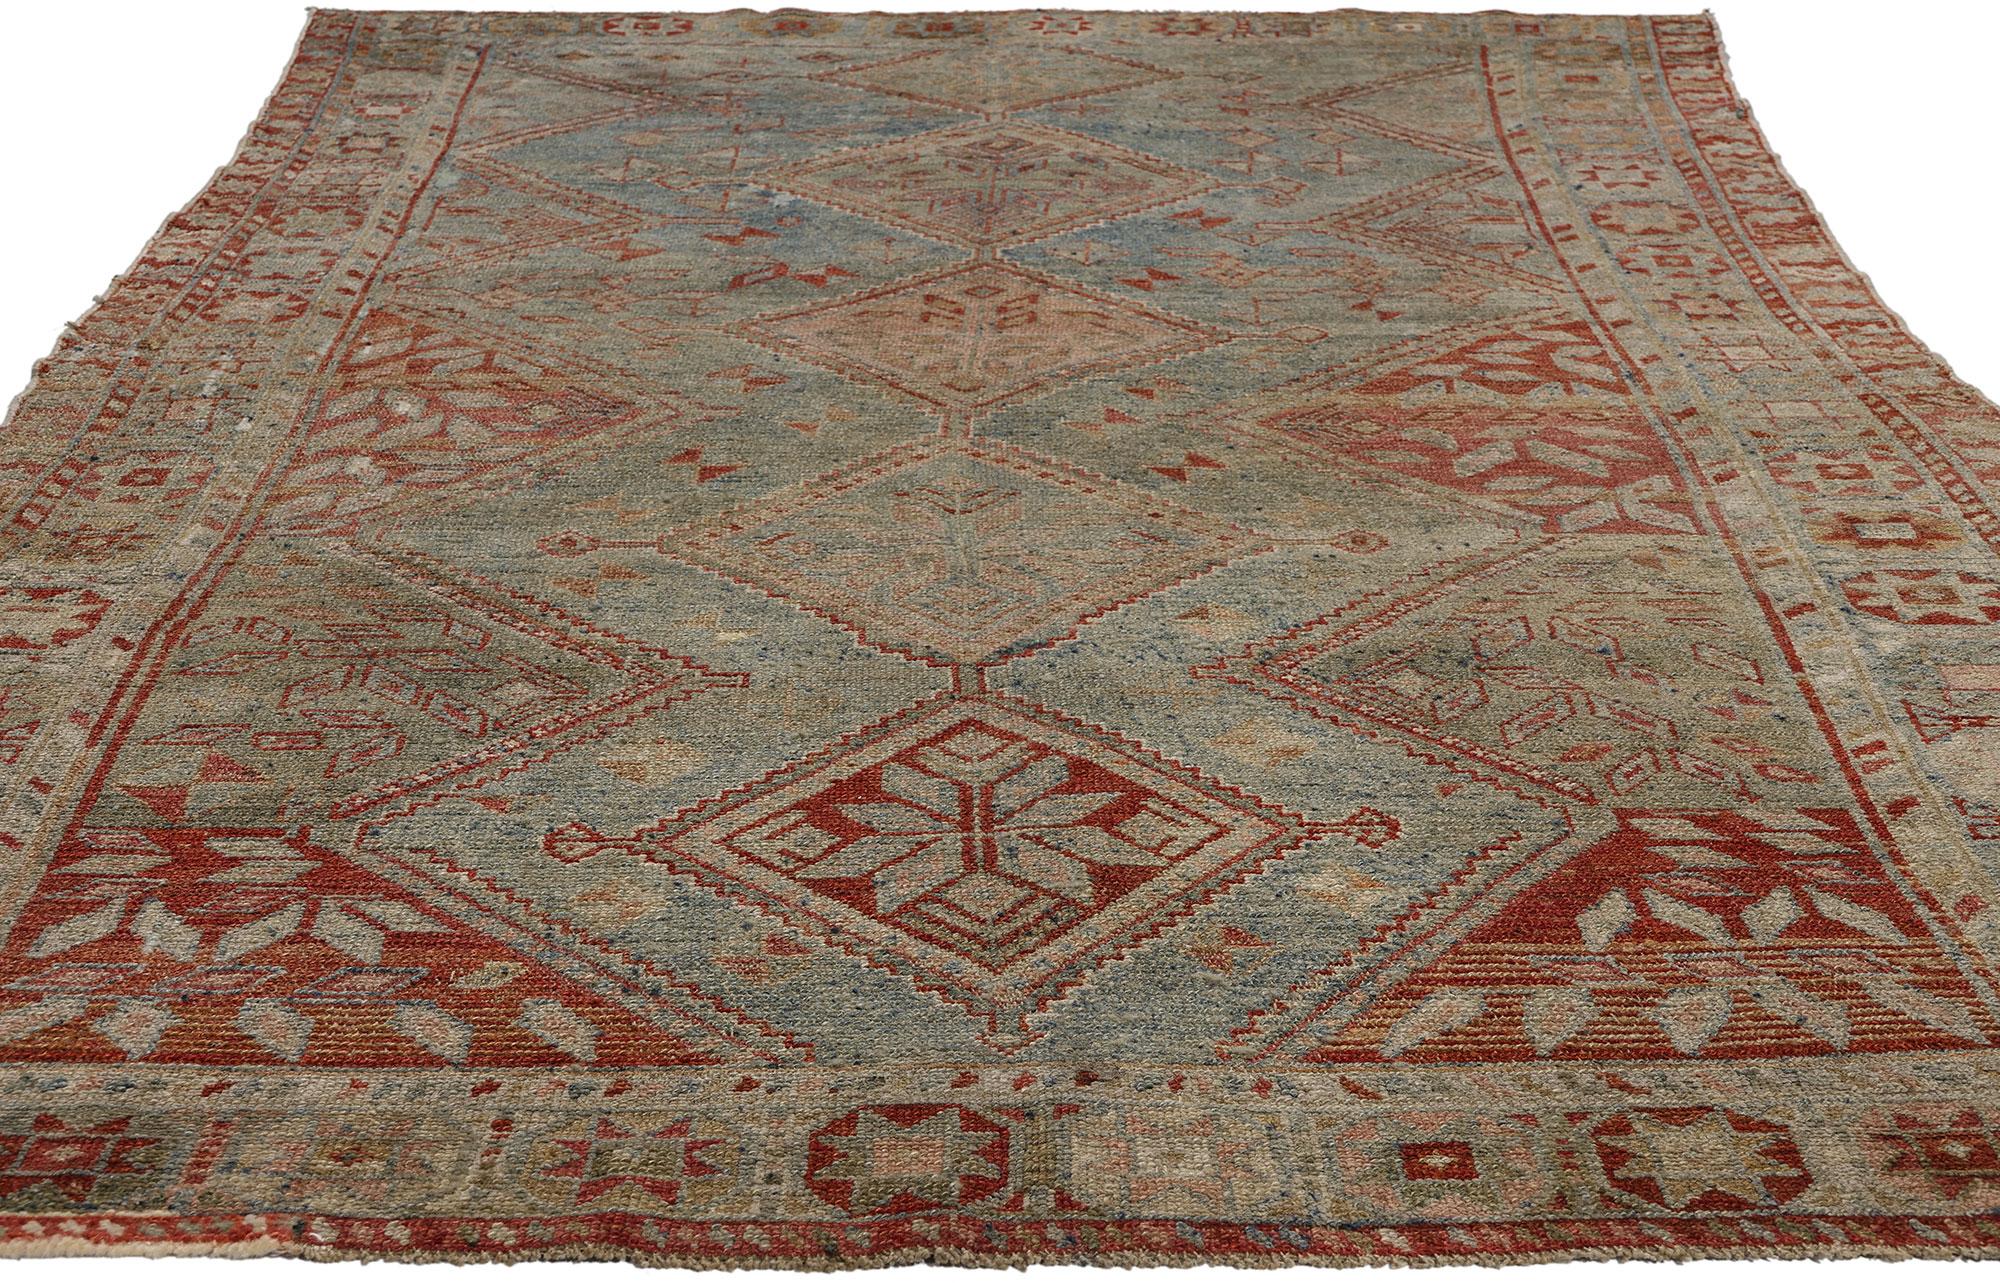 Rustic Antique Persian Shiraz Rug, Rugged Beauty Meets Tribal Enchantment  For Sale